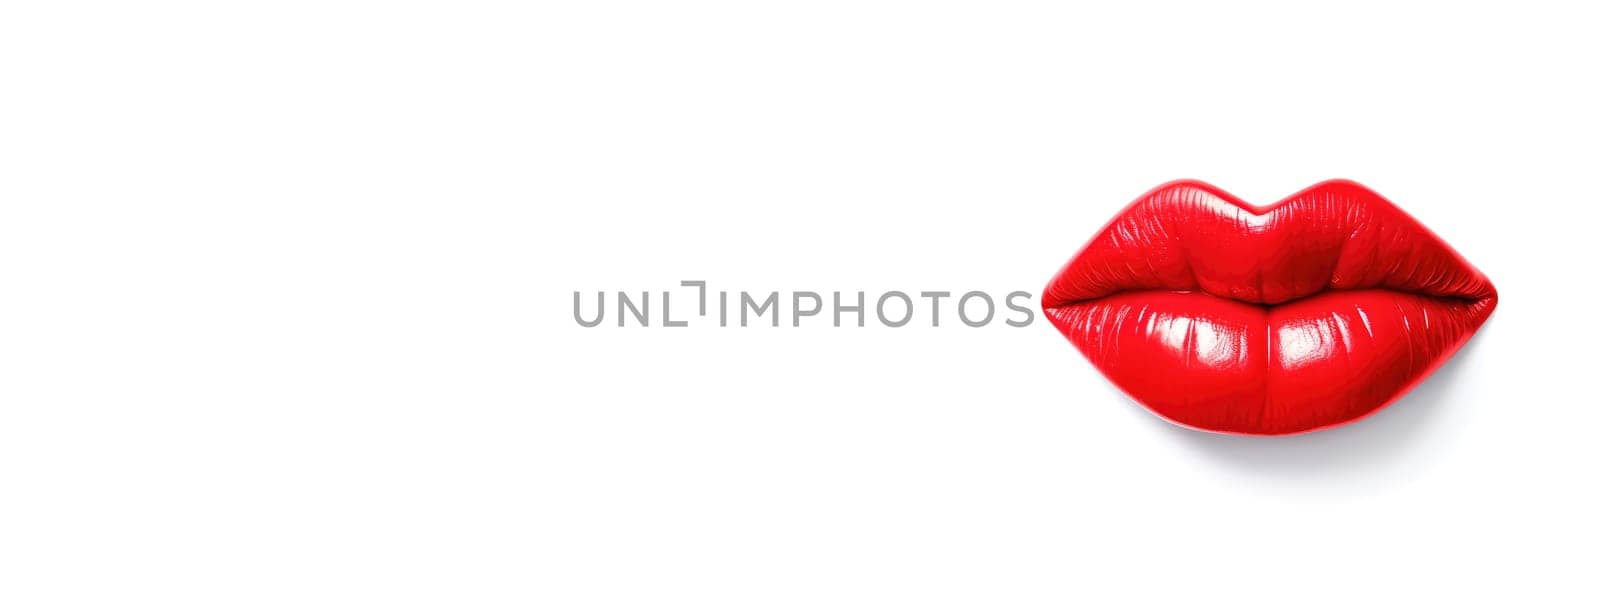 Banner of 3D realistic smiling glossy red lips on white. cosmetic, fashion, and romantic designs. Open mouth with teeth, lipstick promotion